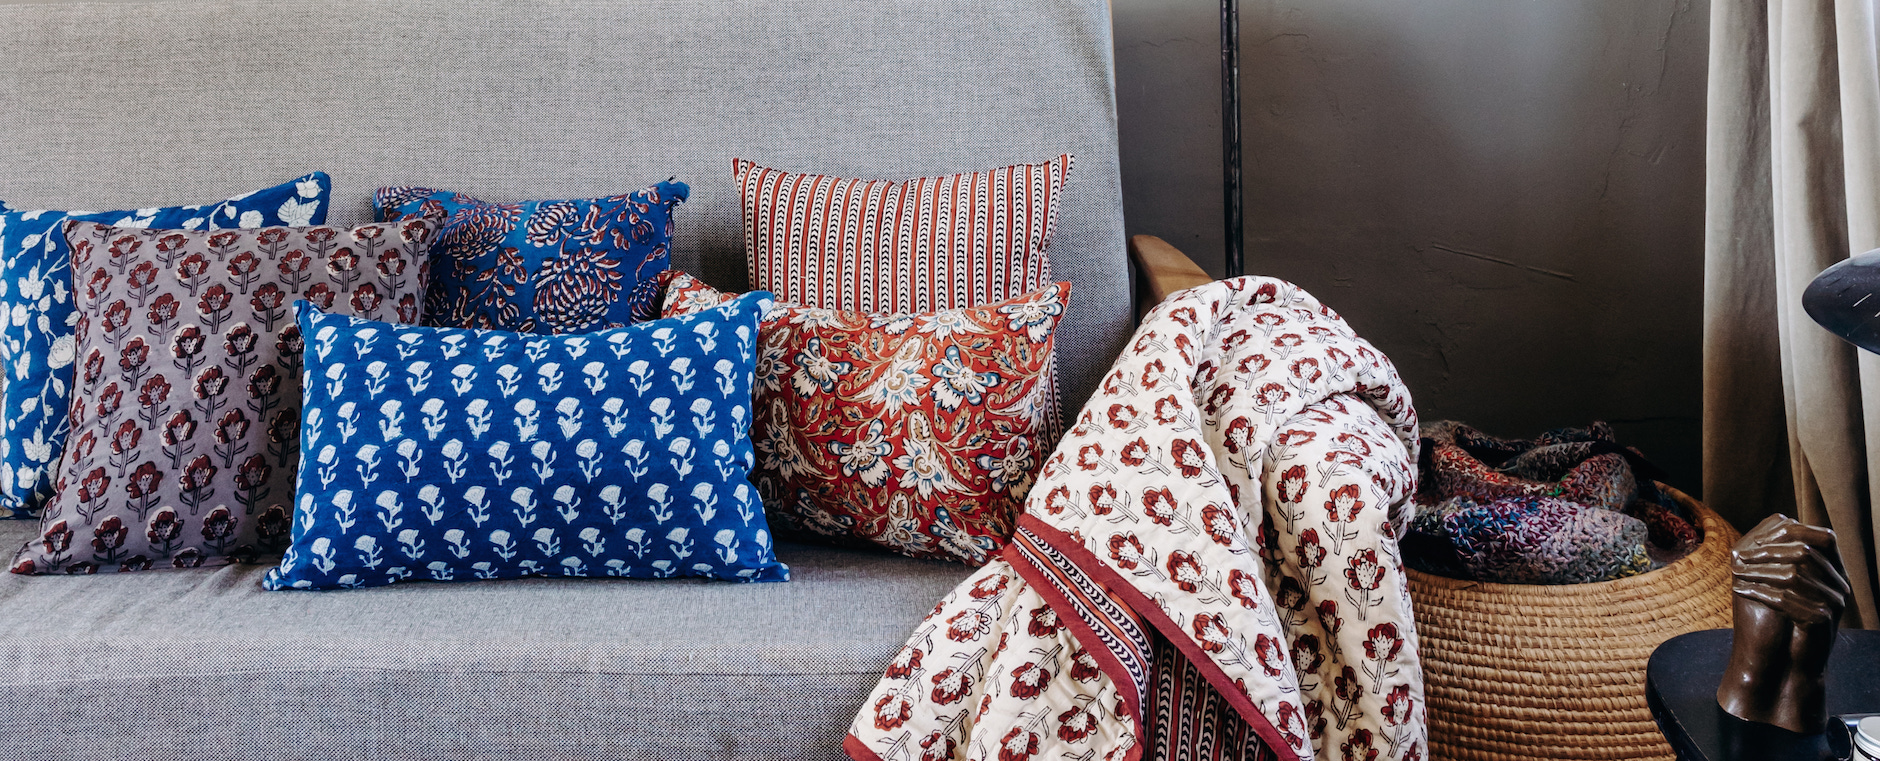 Boho chic cushion covers and indian printed quilt